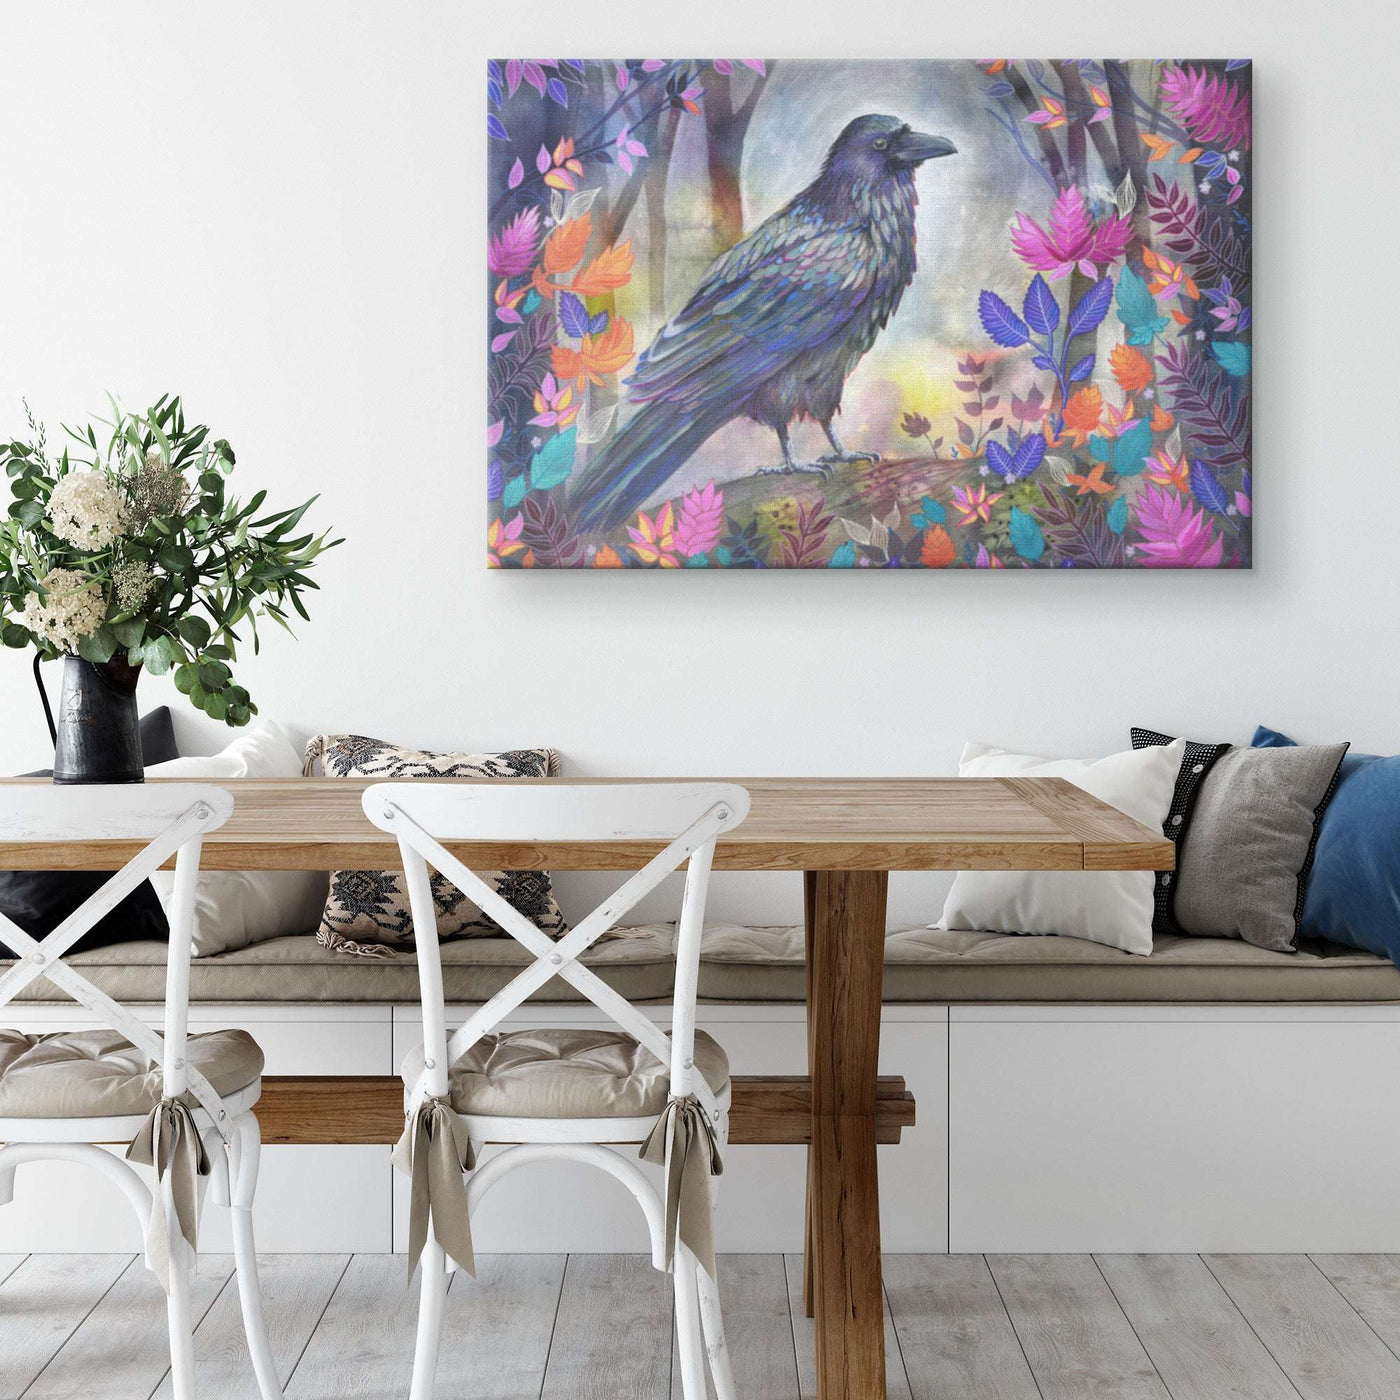 A vibrant Canvas Raven Art Print of a crow among colorful flowers hanging above a wooden dining table.